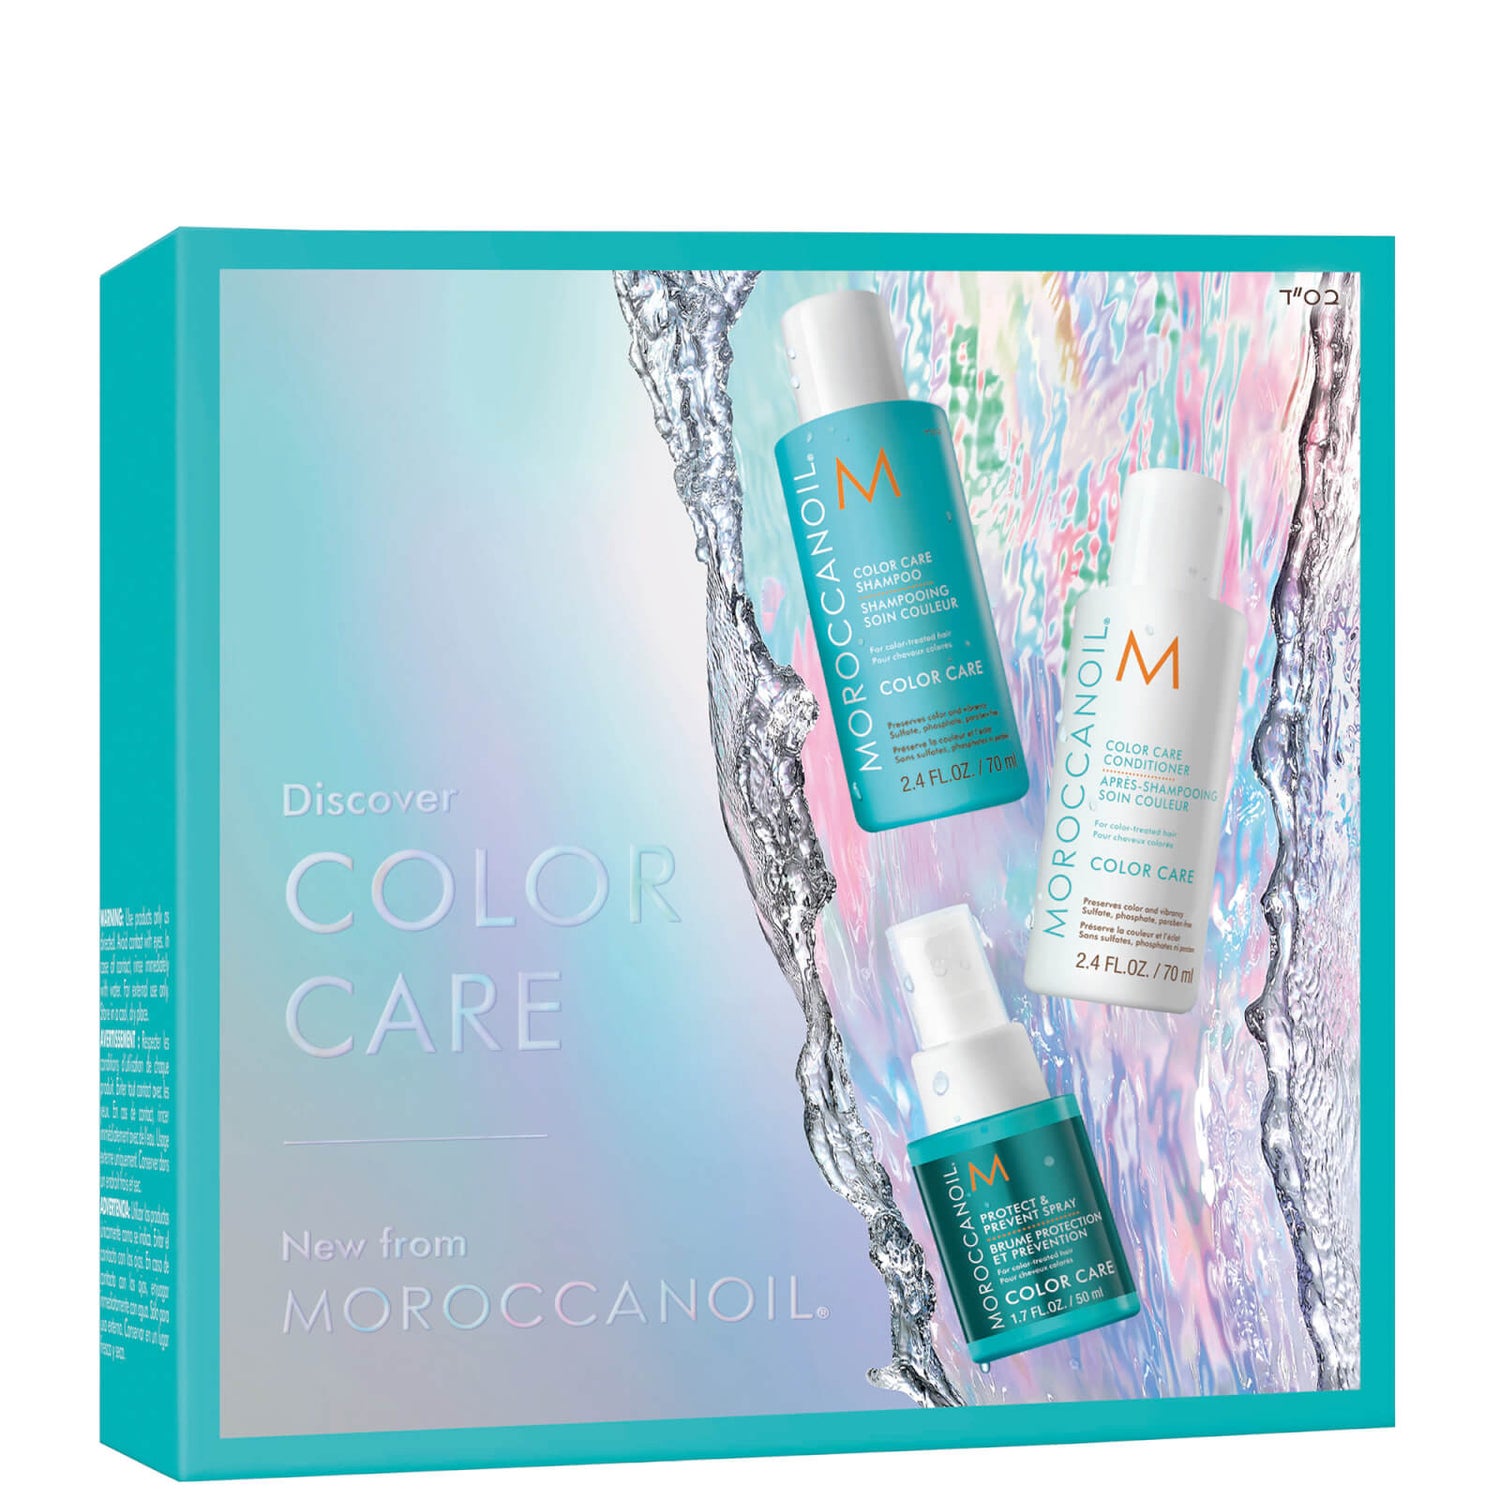 Moroccanoil Discover Color Care Kit (Worth £24.85)